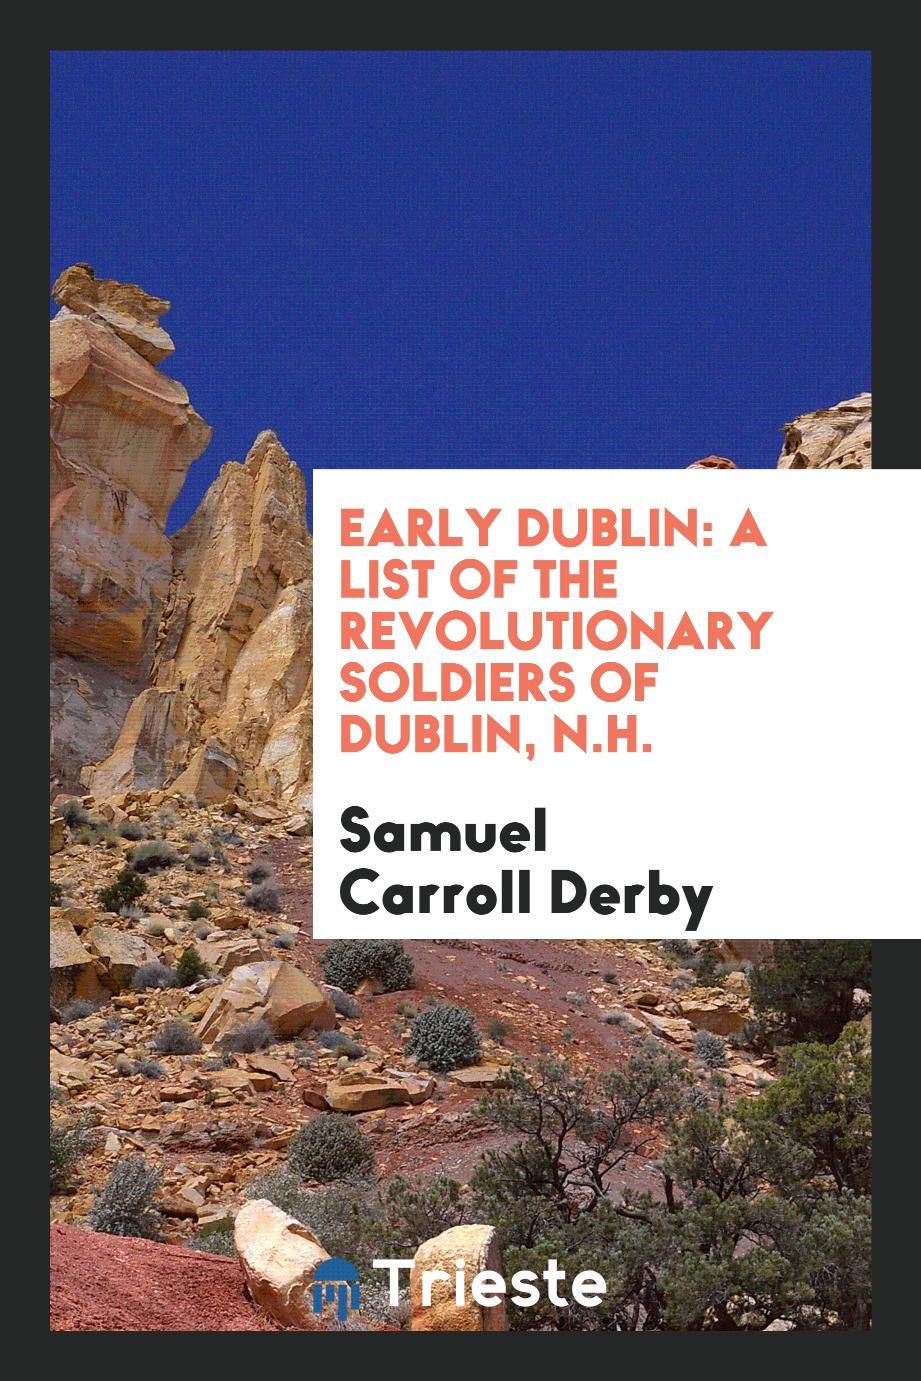 Early Dublin: A List of the Revolutionary Soldiers of Dublin, N.H.